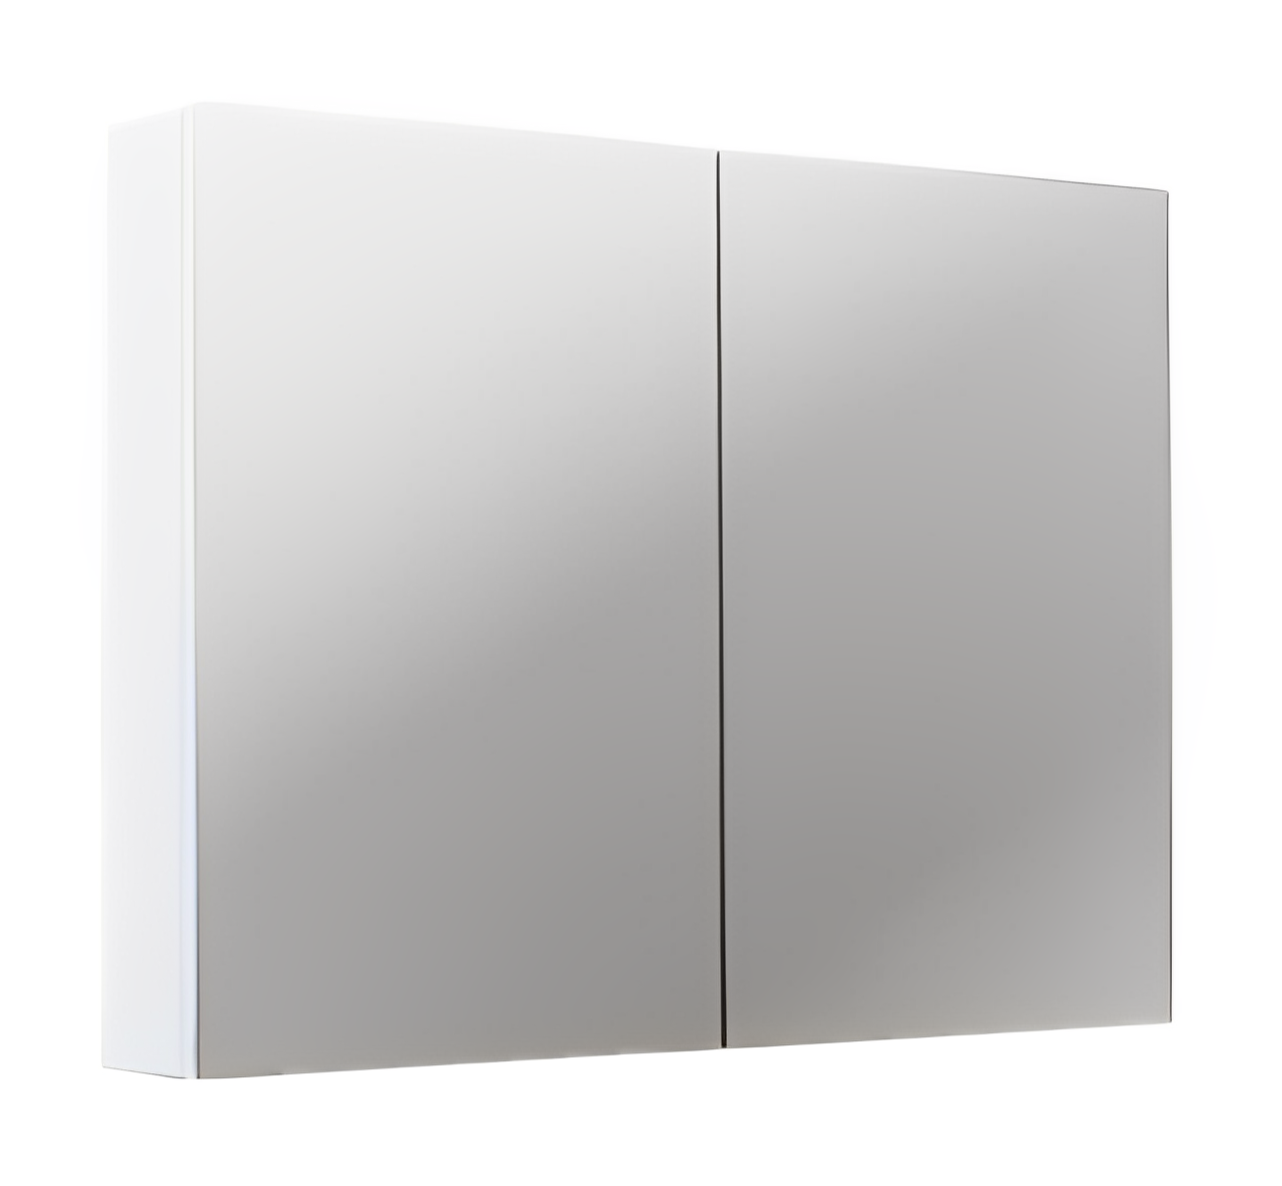 POSEIDON MPSV MIRROR CABINET (AVAILABLE IN 600MM AND 750MM)